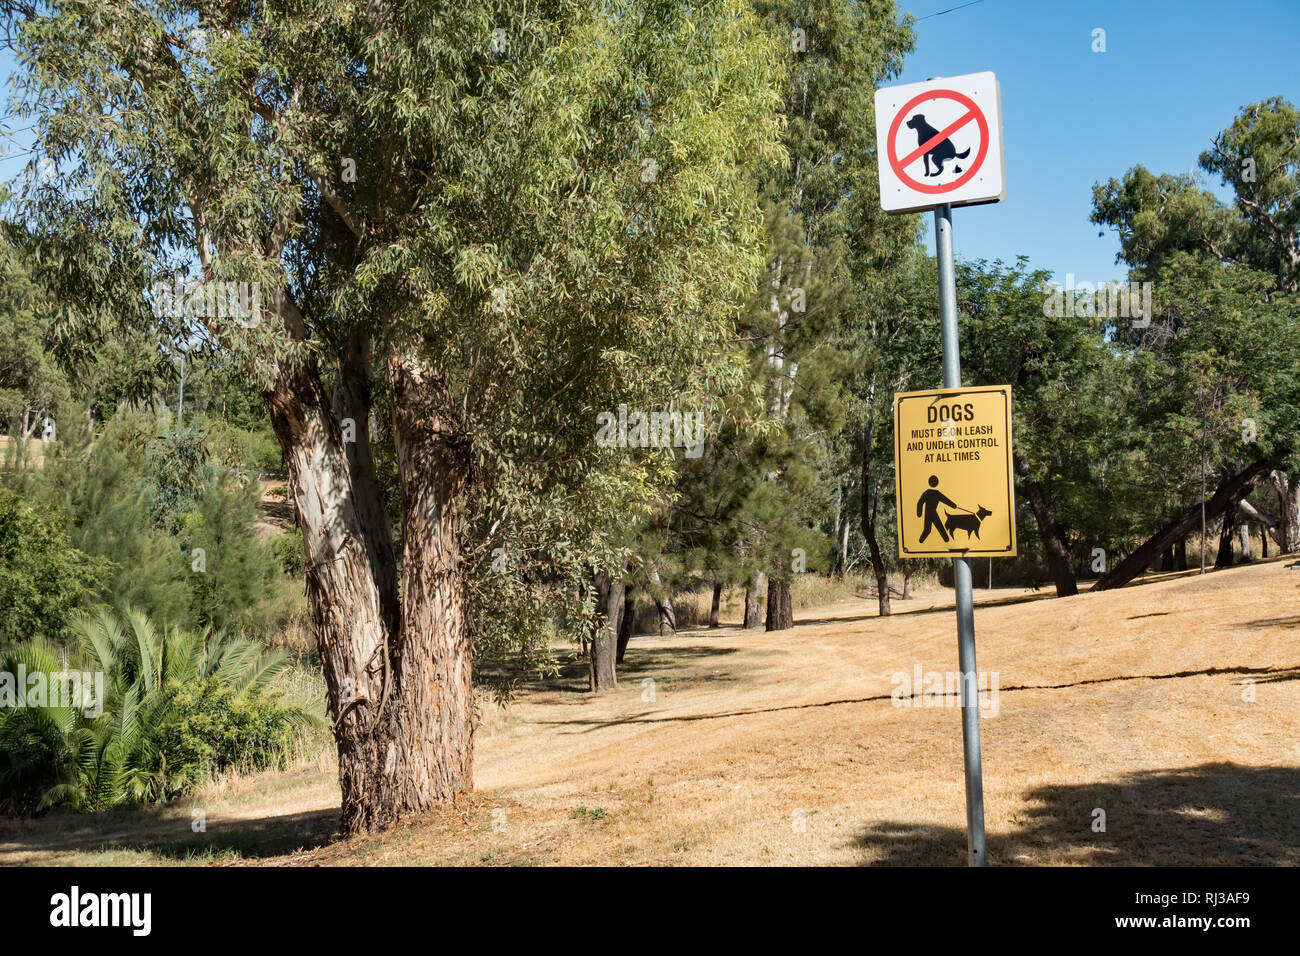 Signs advising owners to keep their dog on a lead and to clean up their excrement, Tamworth Australia. Stock Photo